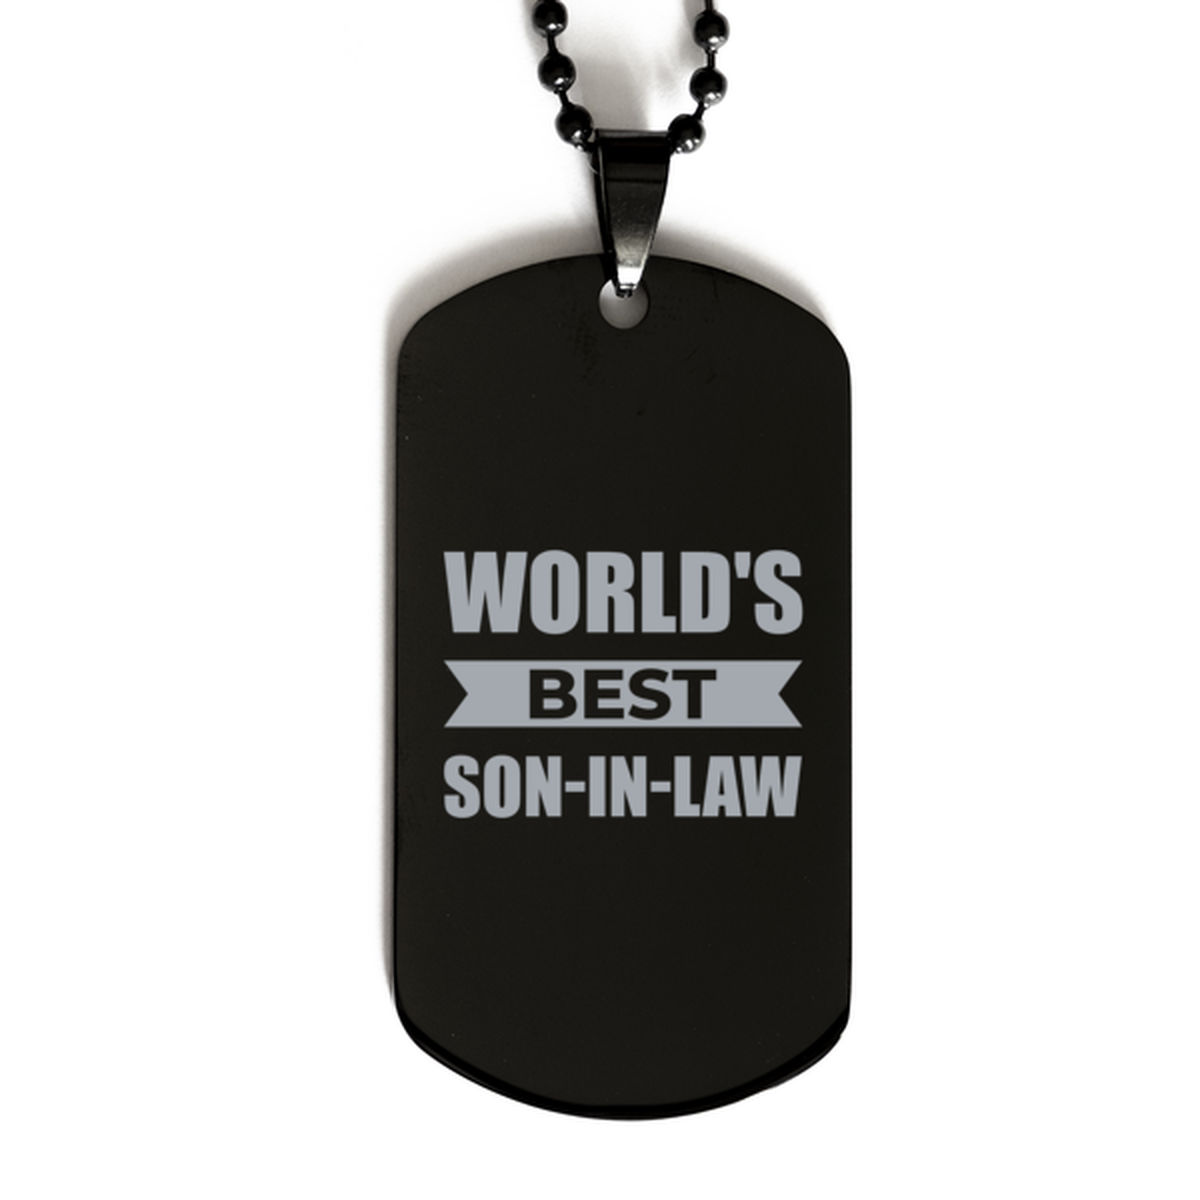 Worlds Best Son-in-law Gifts, Funny Black Engraved Dog Tag For Son-in-law, Birthday Presents For Men